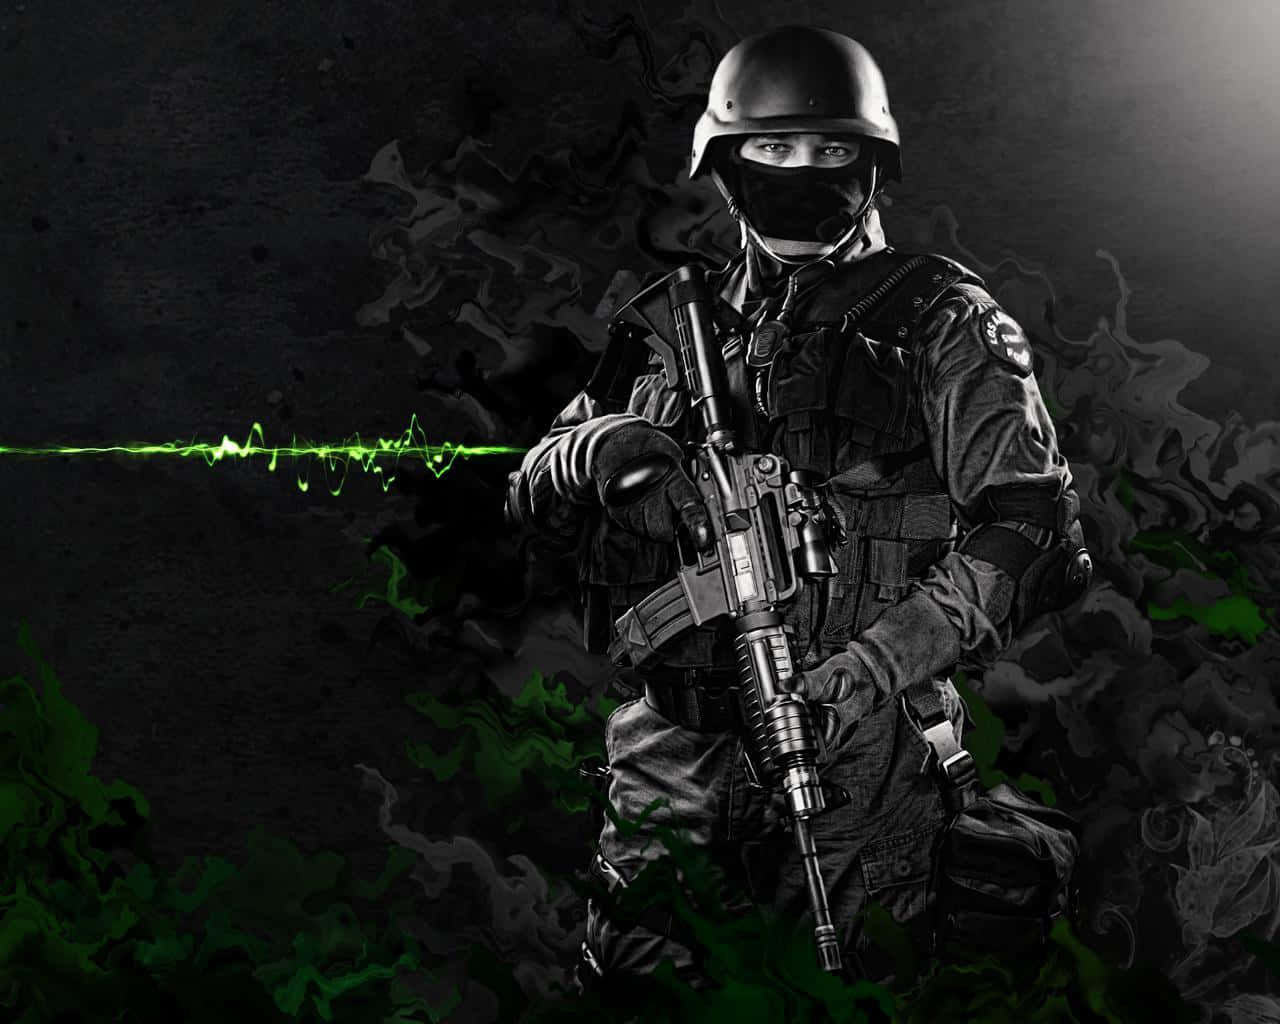 A Swat officer in a ready-for-action stance Wallpaper